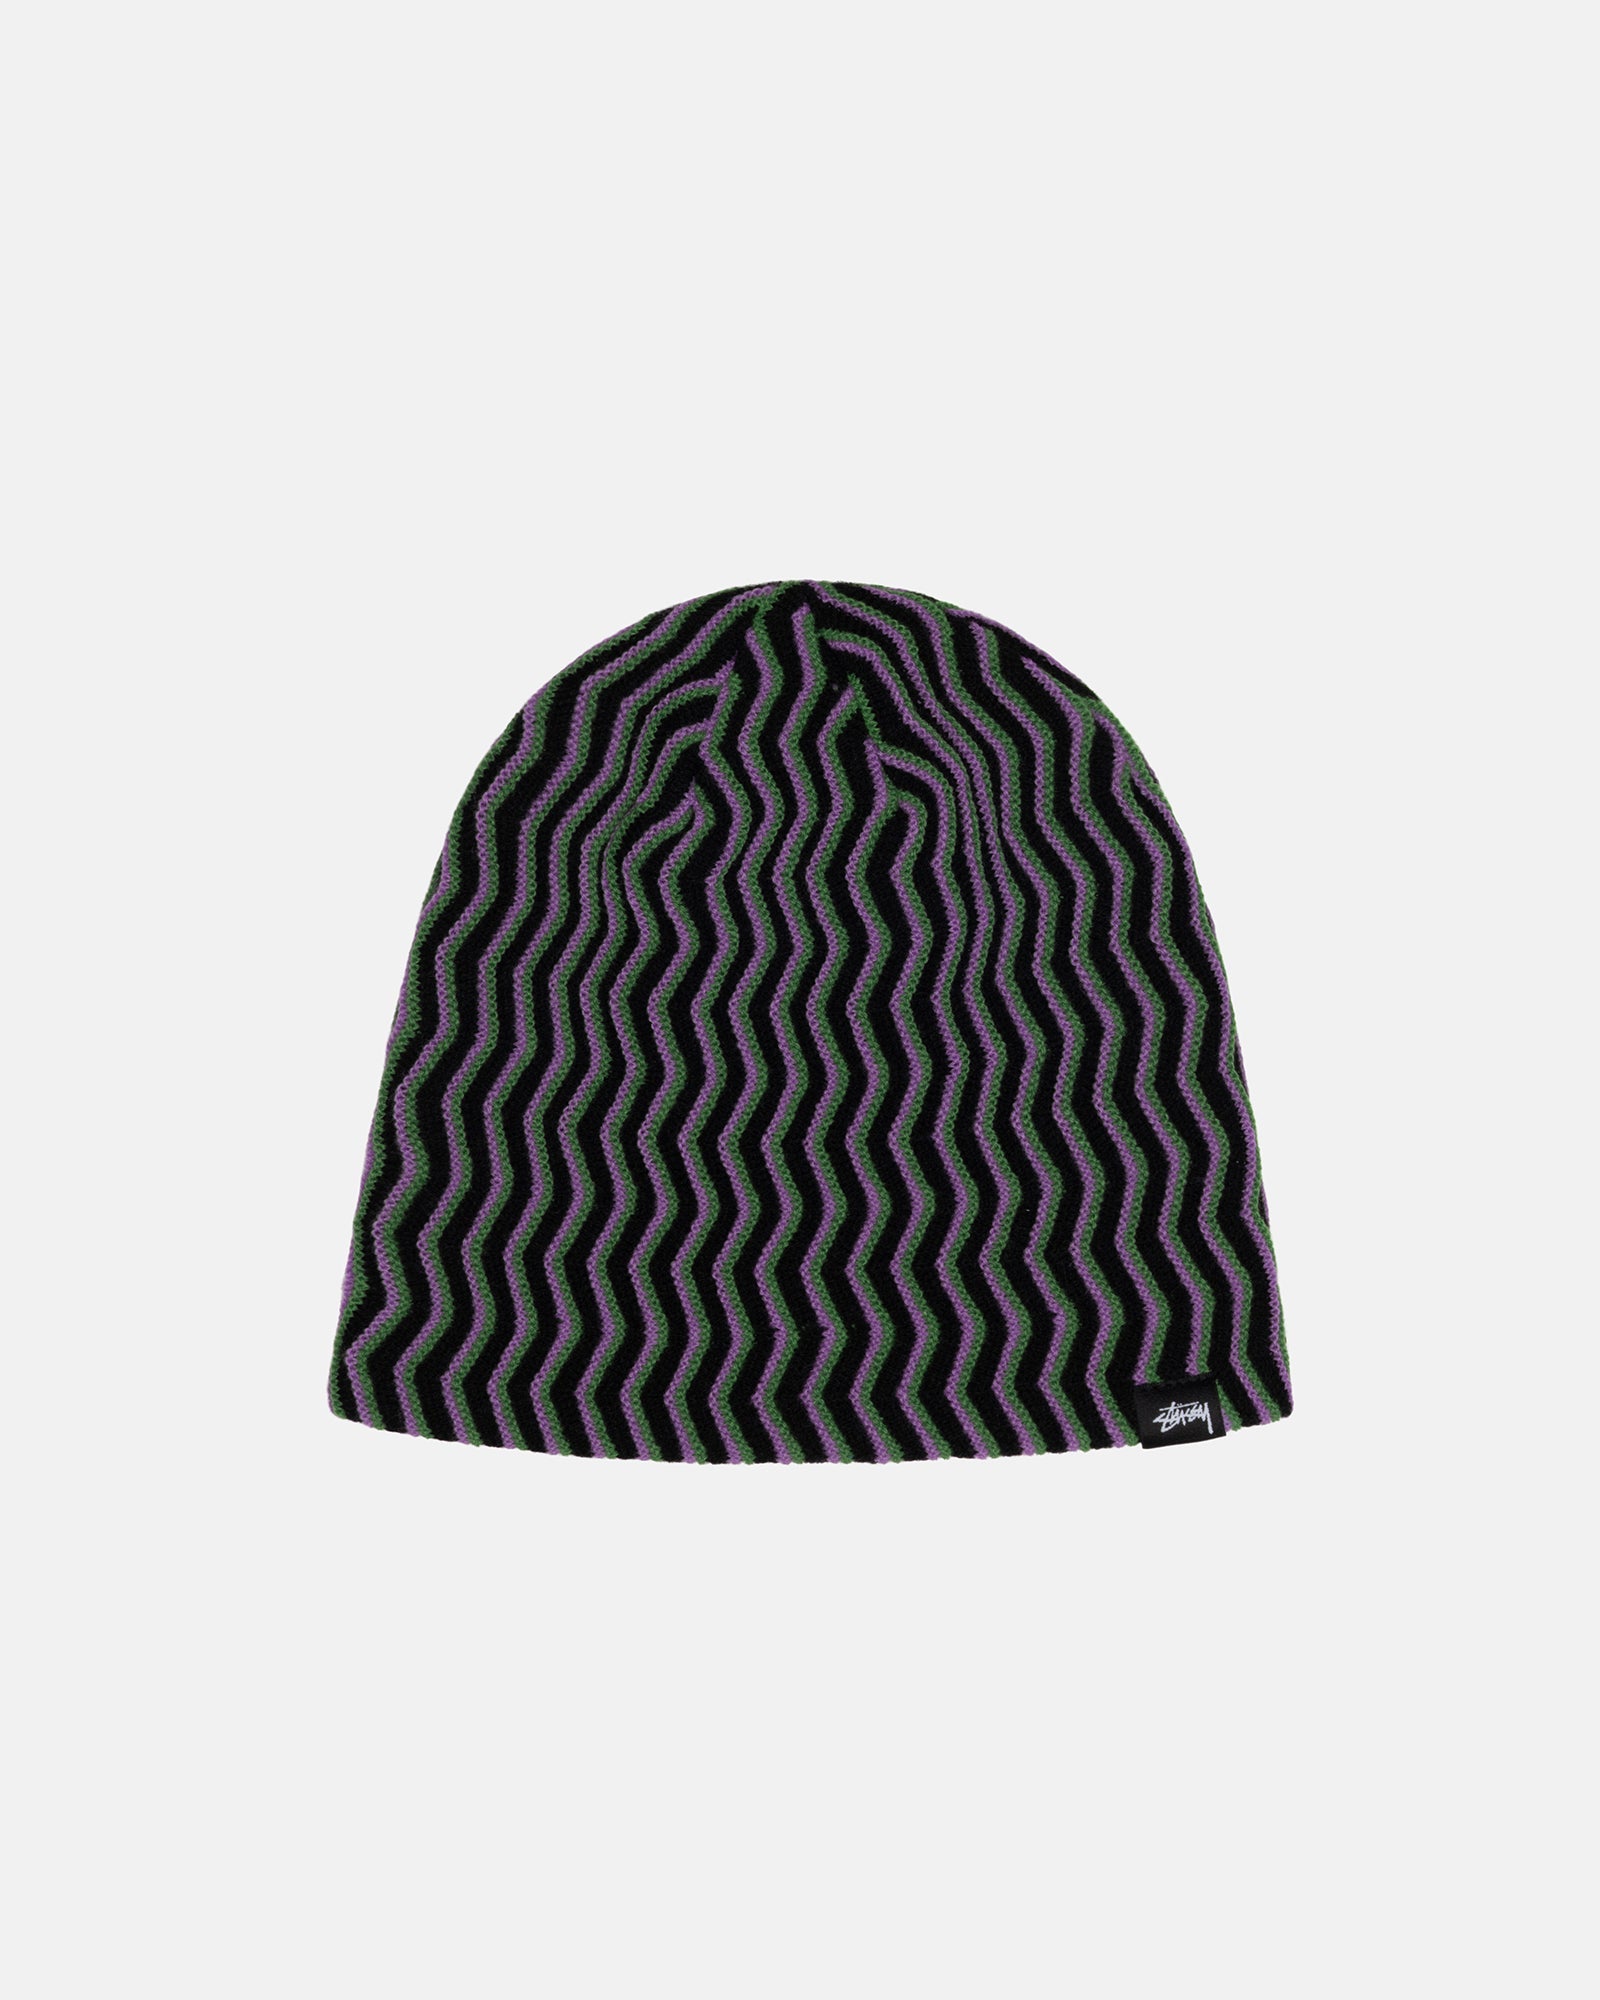 Stussy Hats, Bucket Hats, Caps and Beanies for Men and Women | UK 